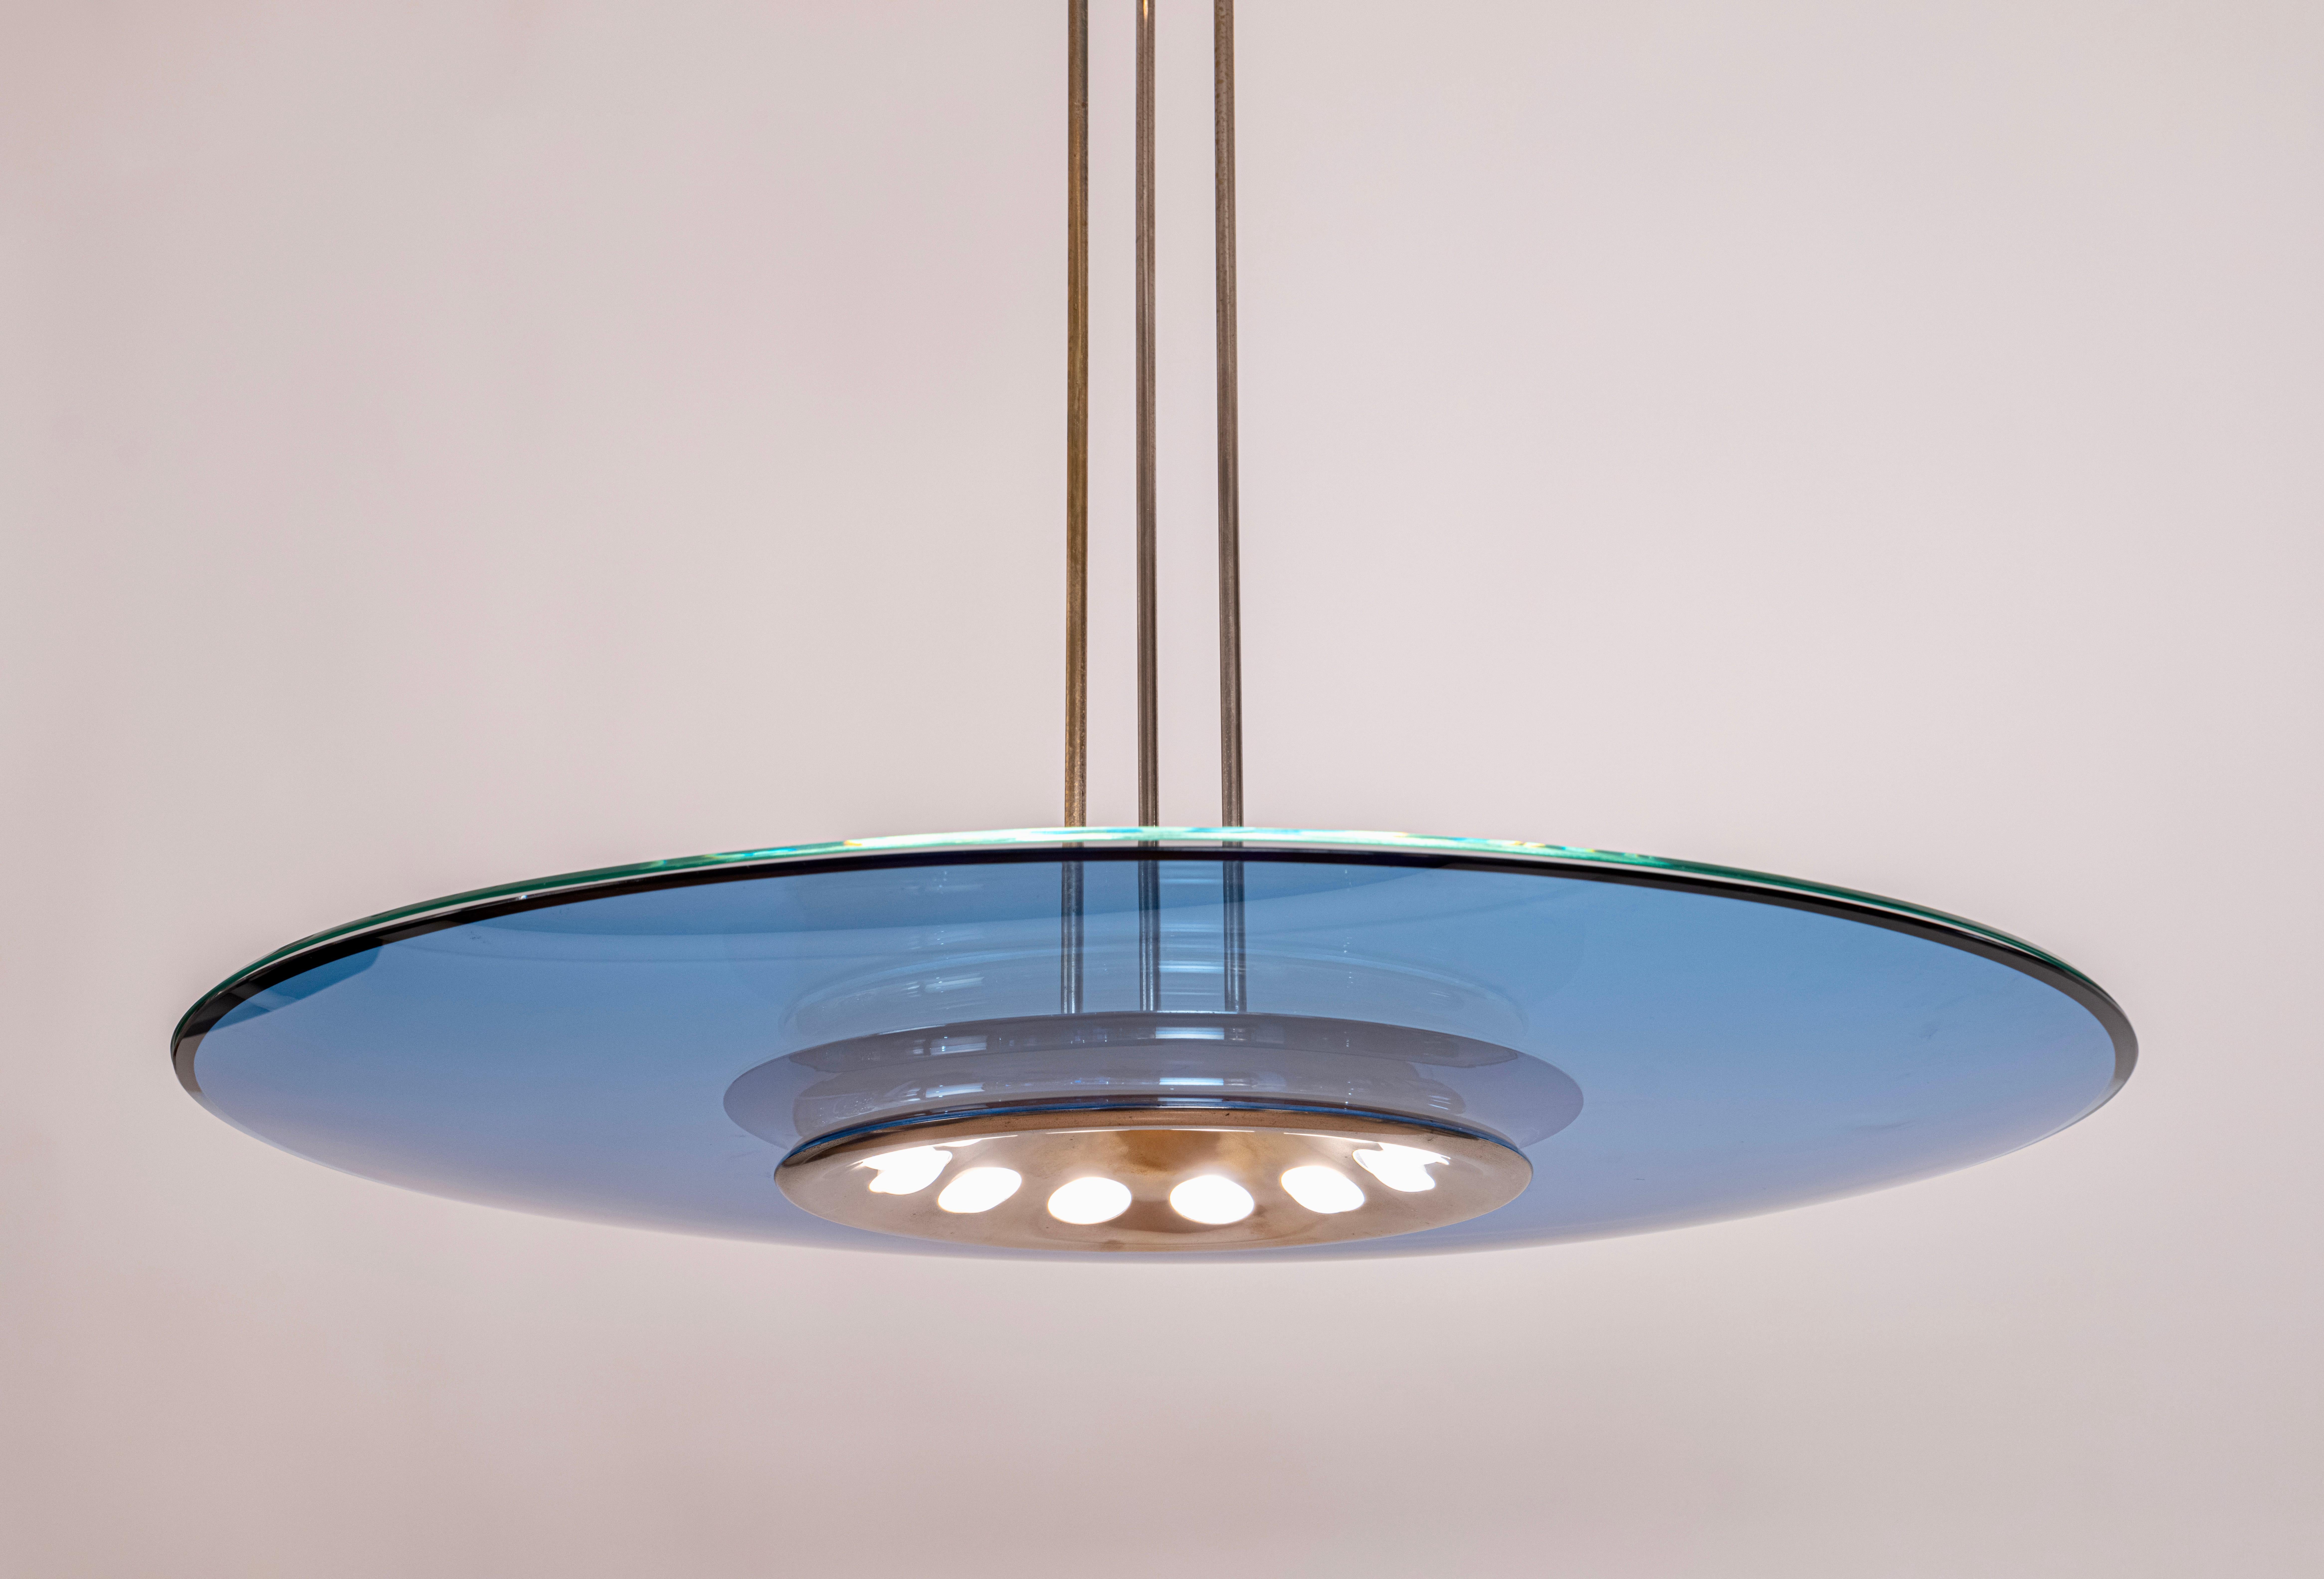 An original and rare, blue glass and nickel-plated brass circular ceiling light designed by Max Ingrand for Fontana Arte, Italy. The model '1508' was first designed in 1954 and comprises of two pieces of glass, one concave and the other flat...these